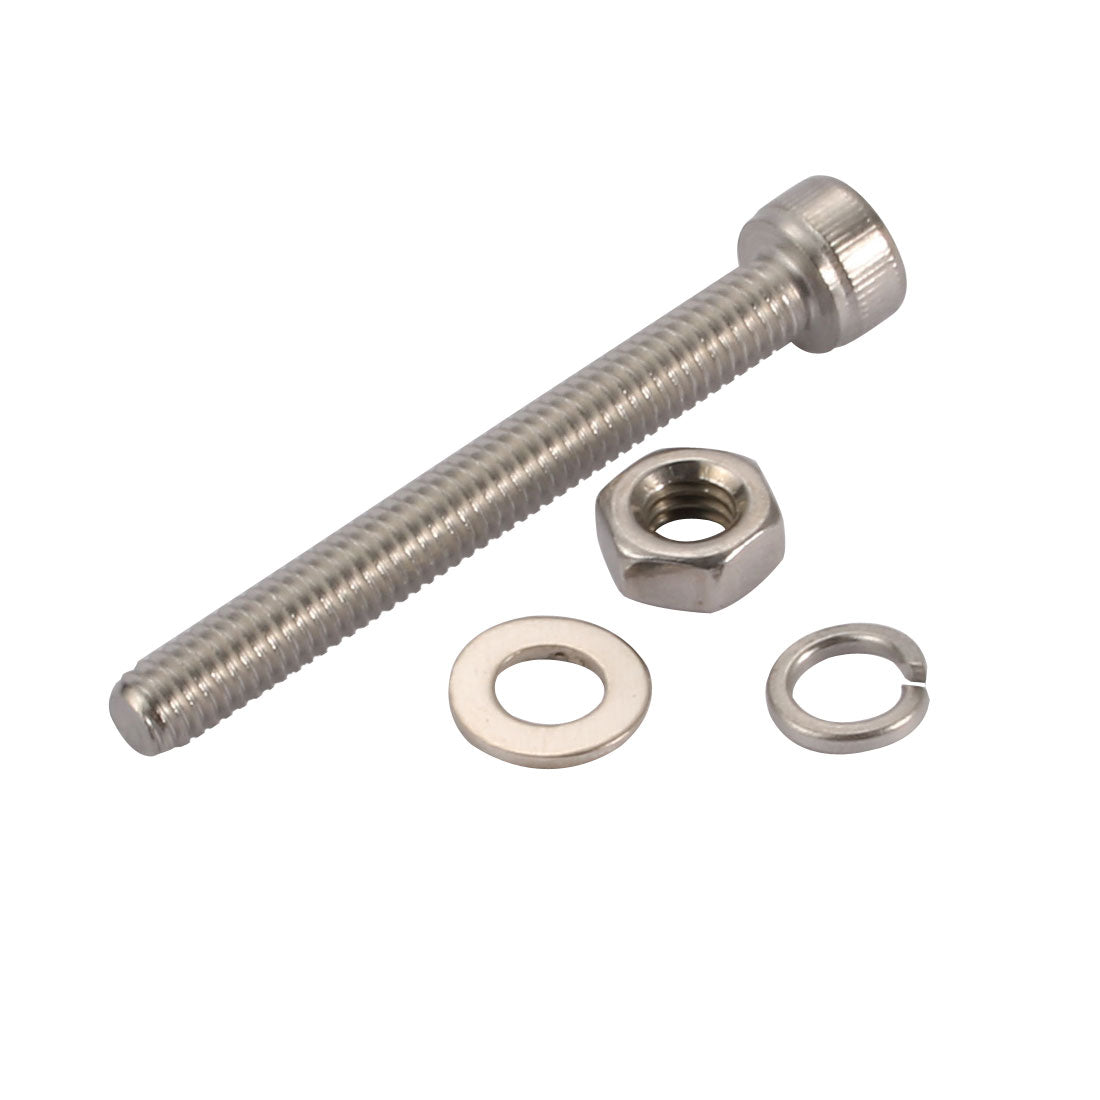 uxcell Uxcell 10pcs M4x40mm 304 Stainless Steel Knurled Hex Socket Head Bolts Nuts w Washers